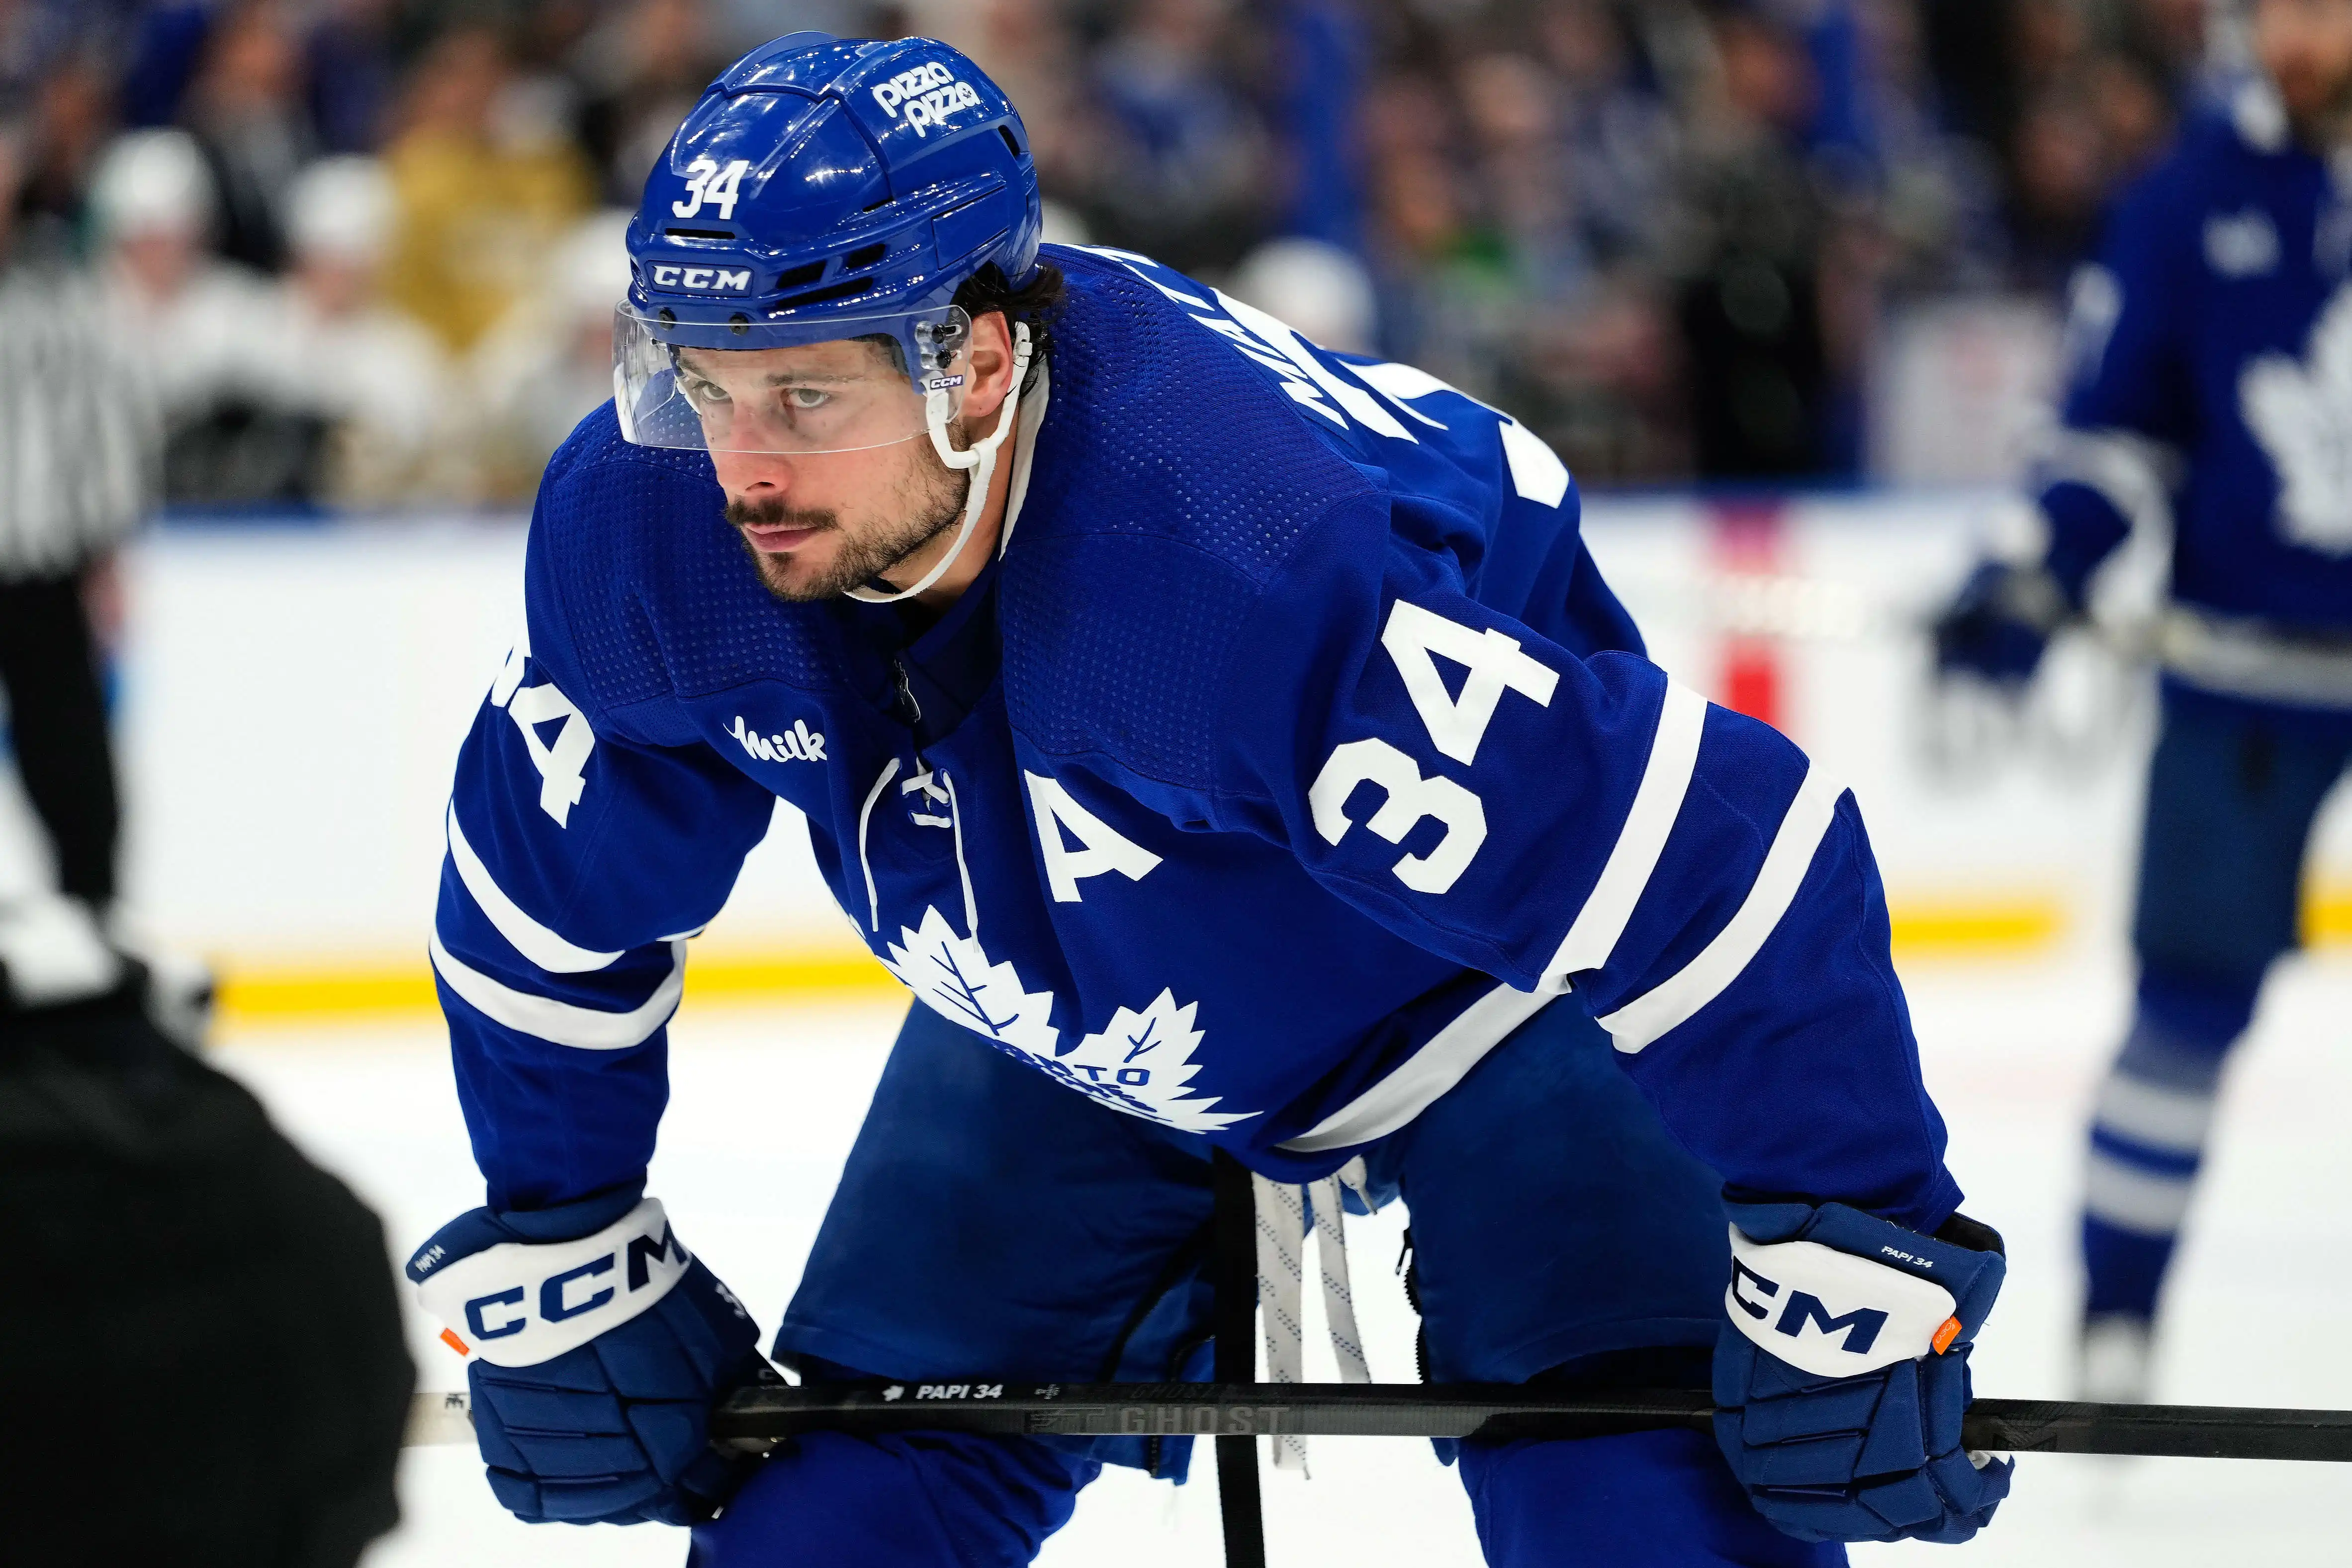 Paul Bissonnette makes big claim about Auston Matthews before Toronto Maple Leafs Game 7